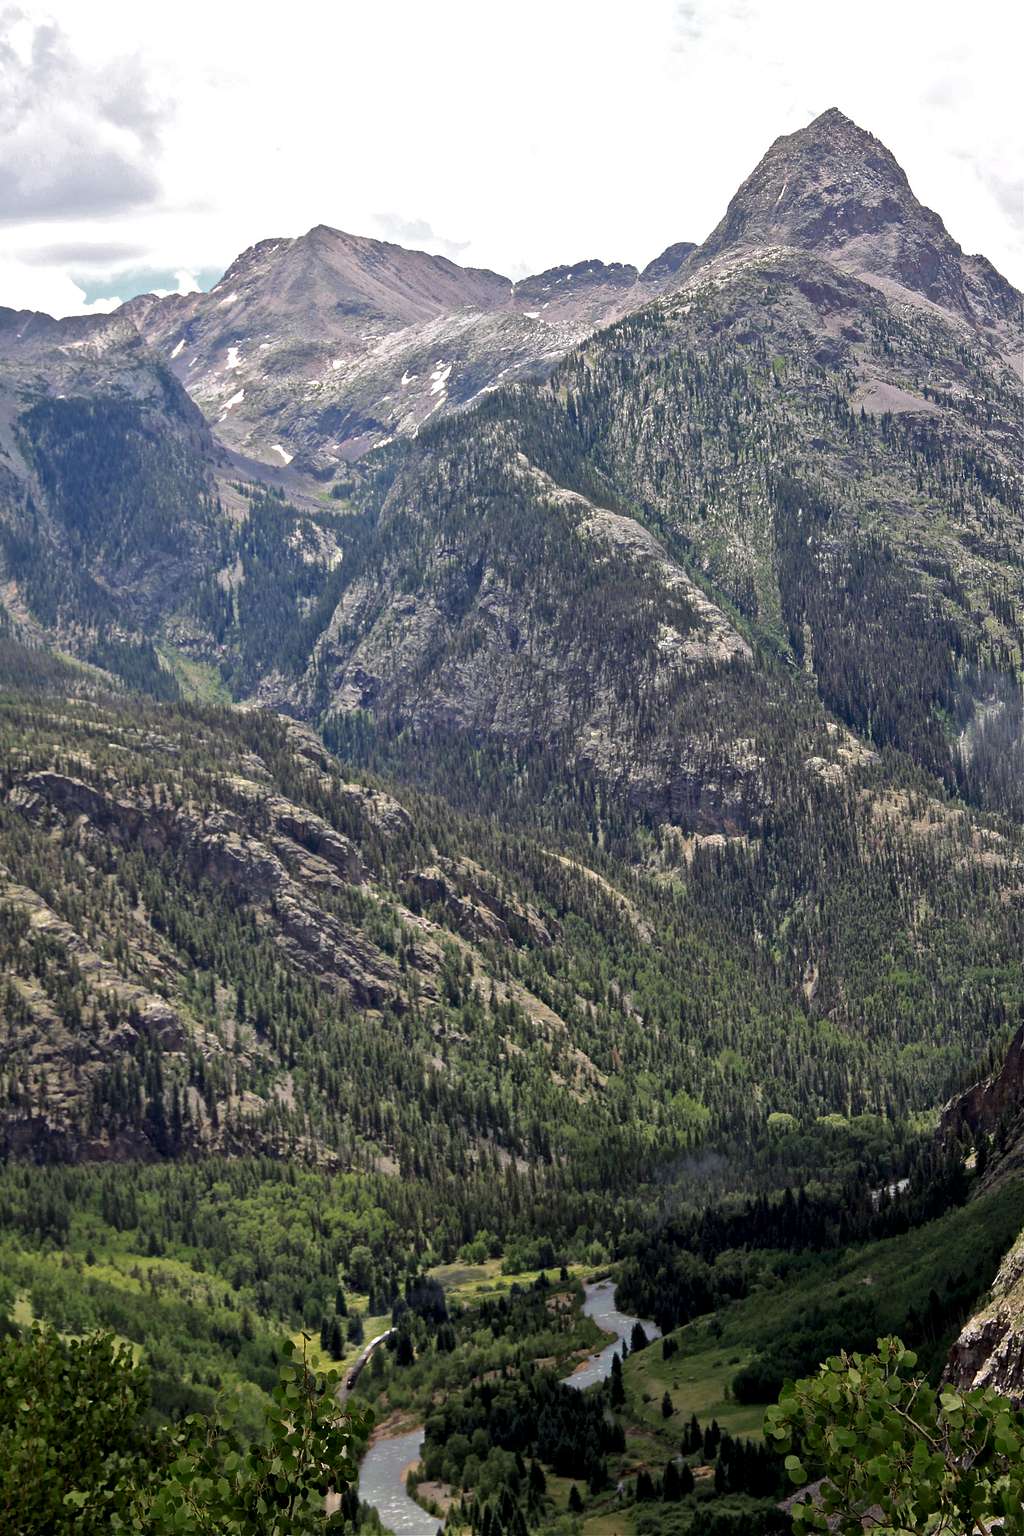 Descent from Molas lake